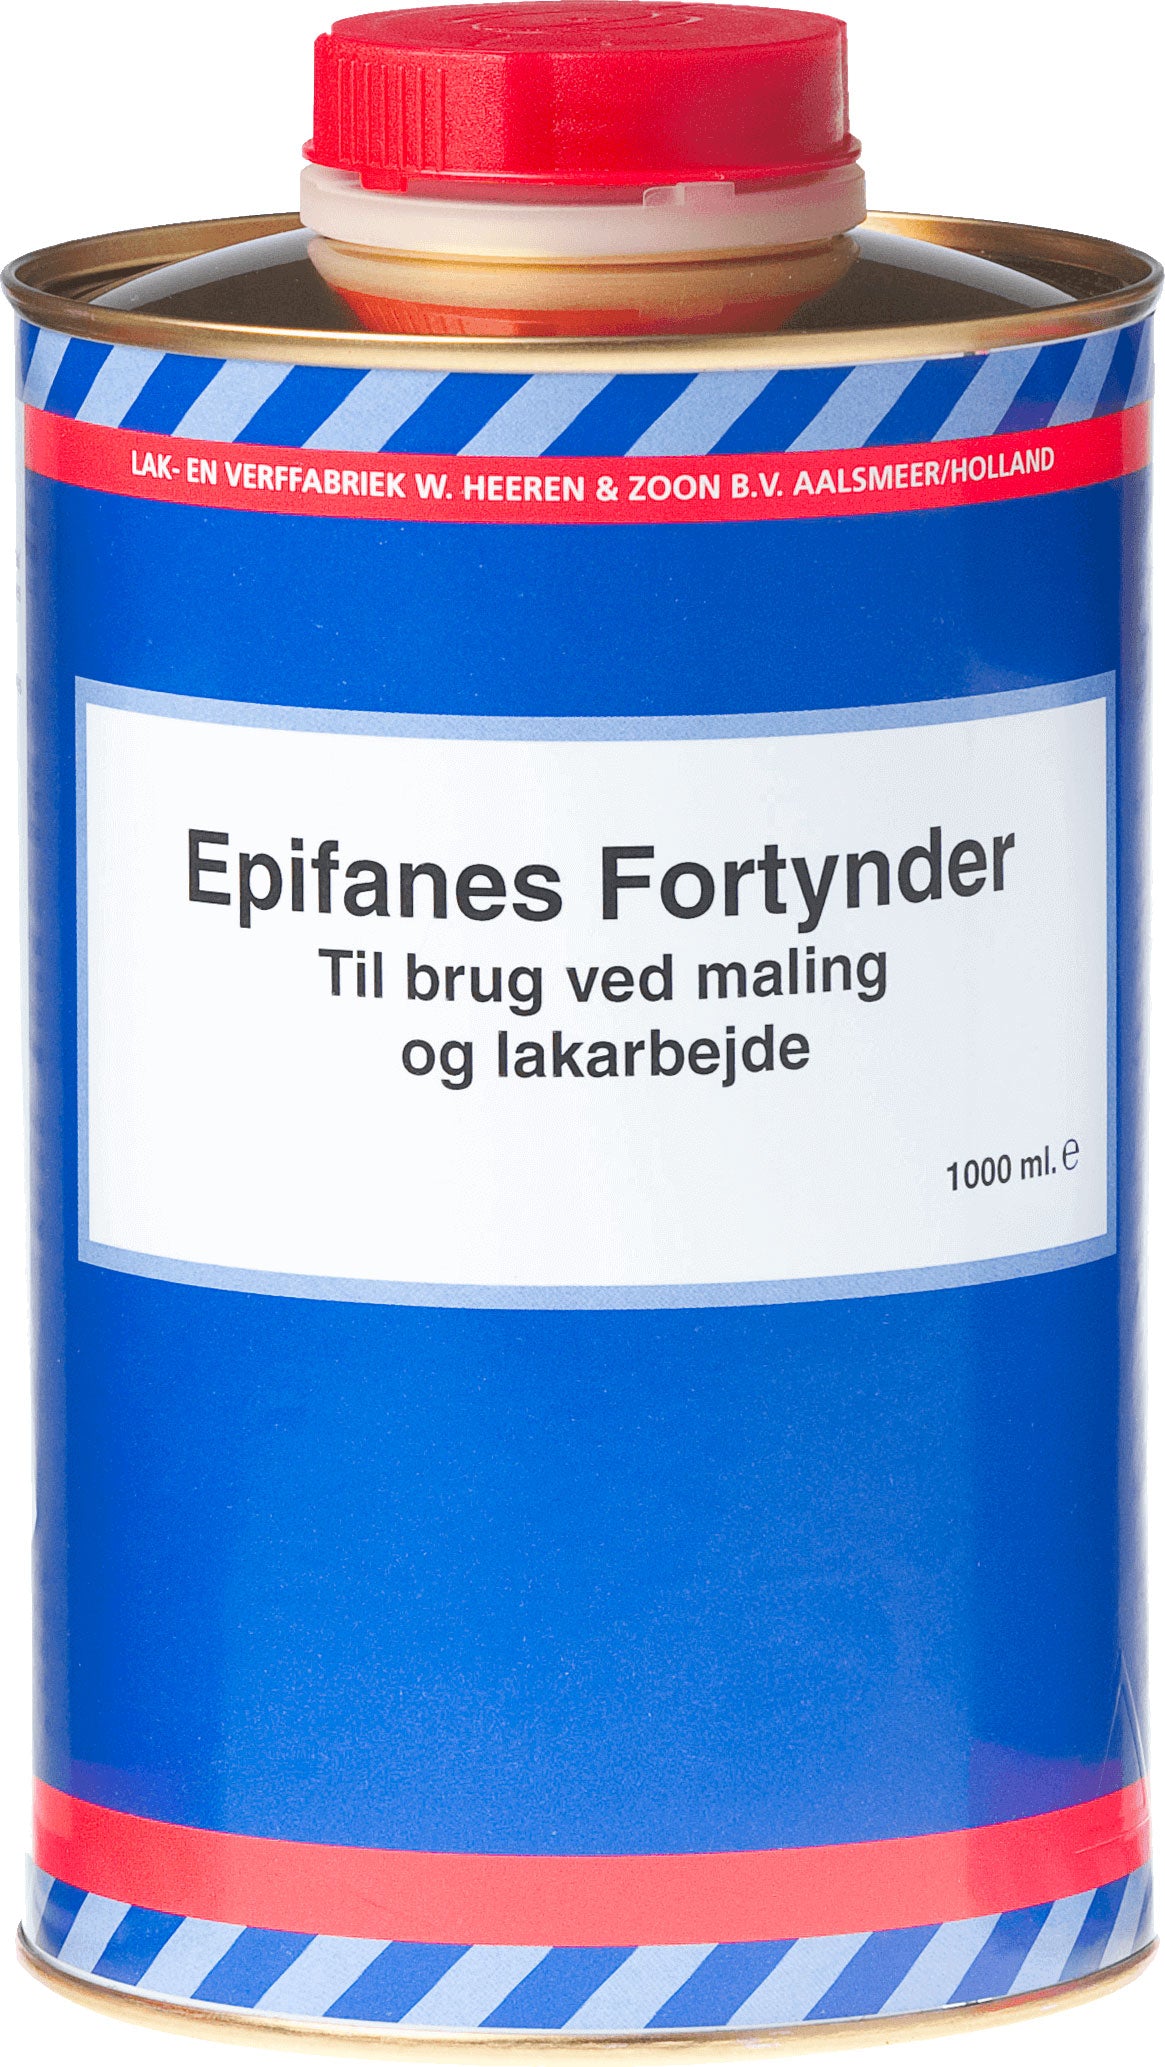 Epiphanes dilutes 1 ltr.